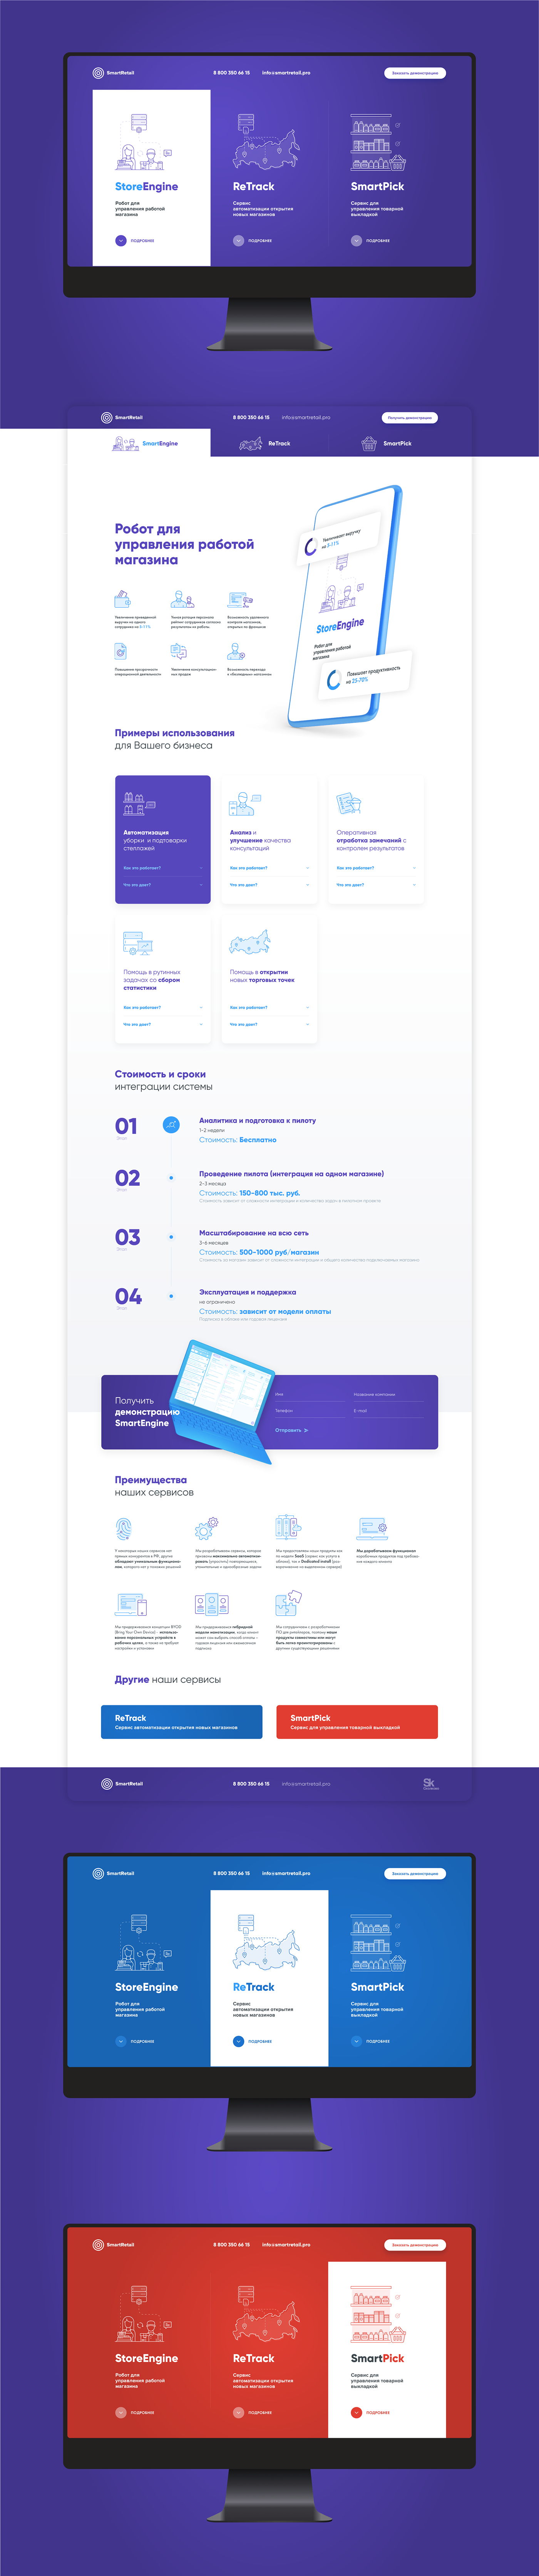 Pricing page example #626: SmartRetail